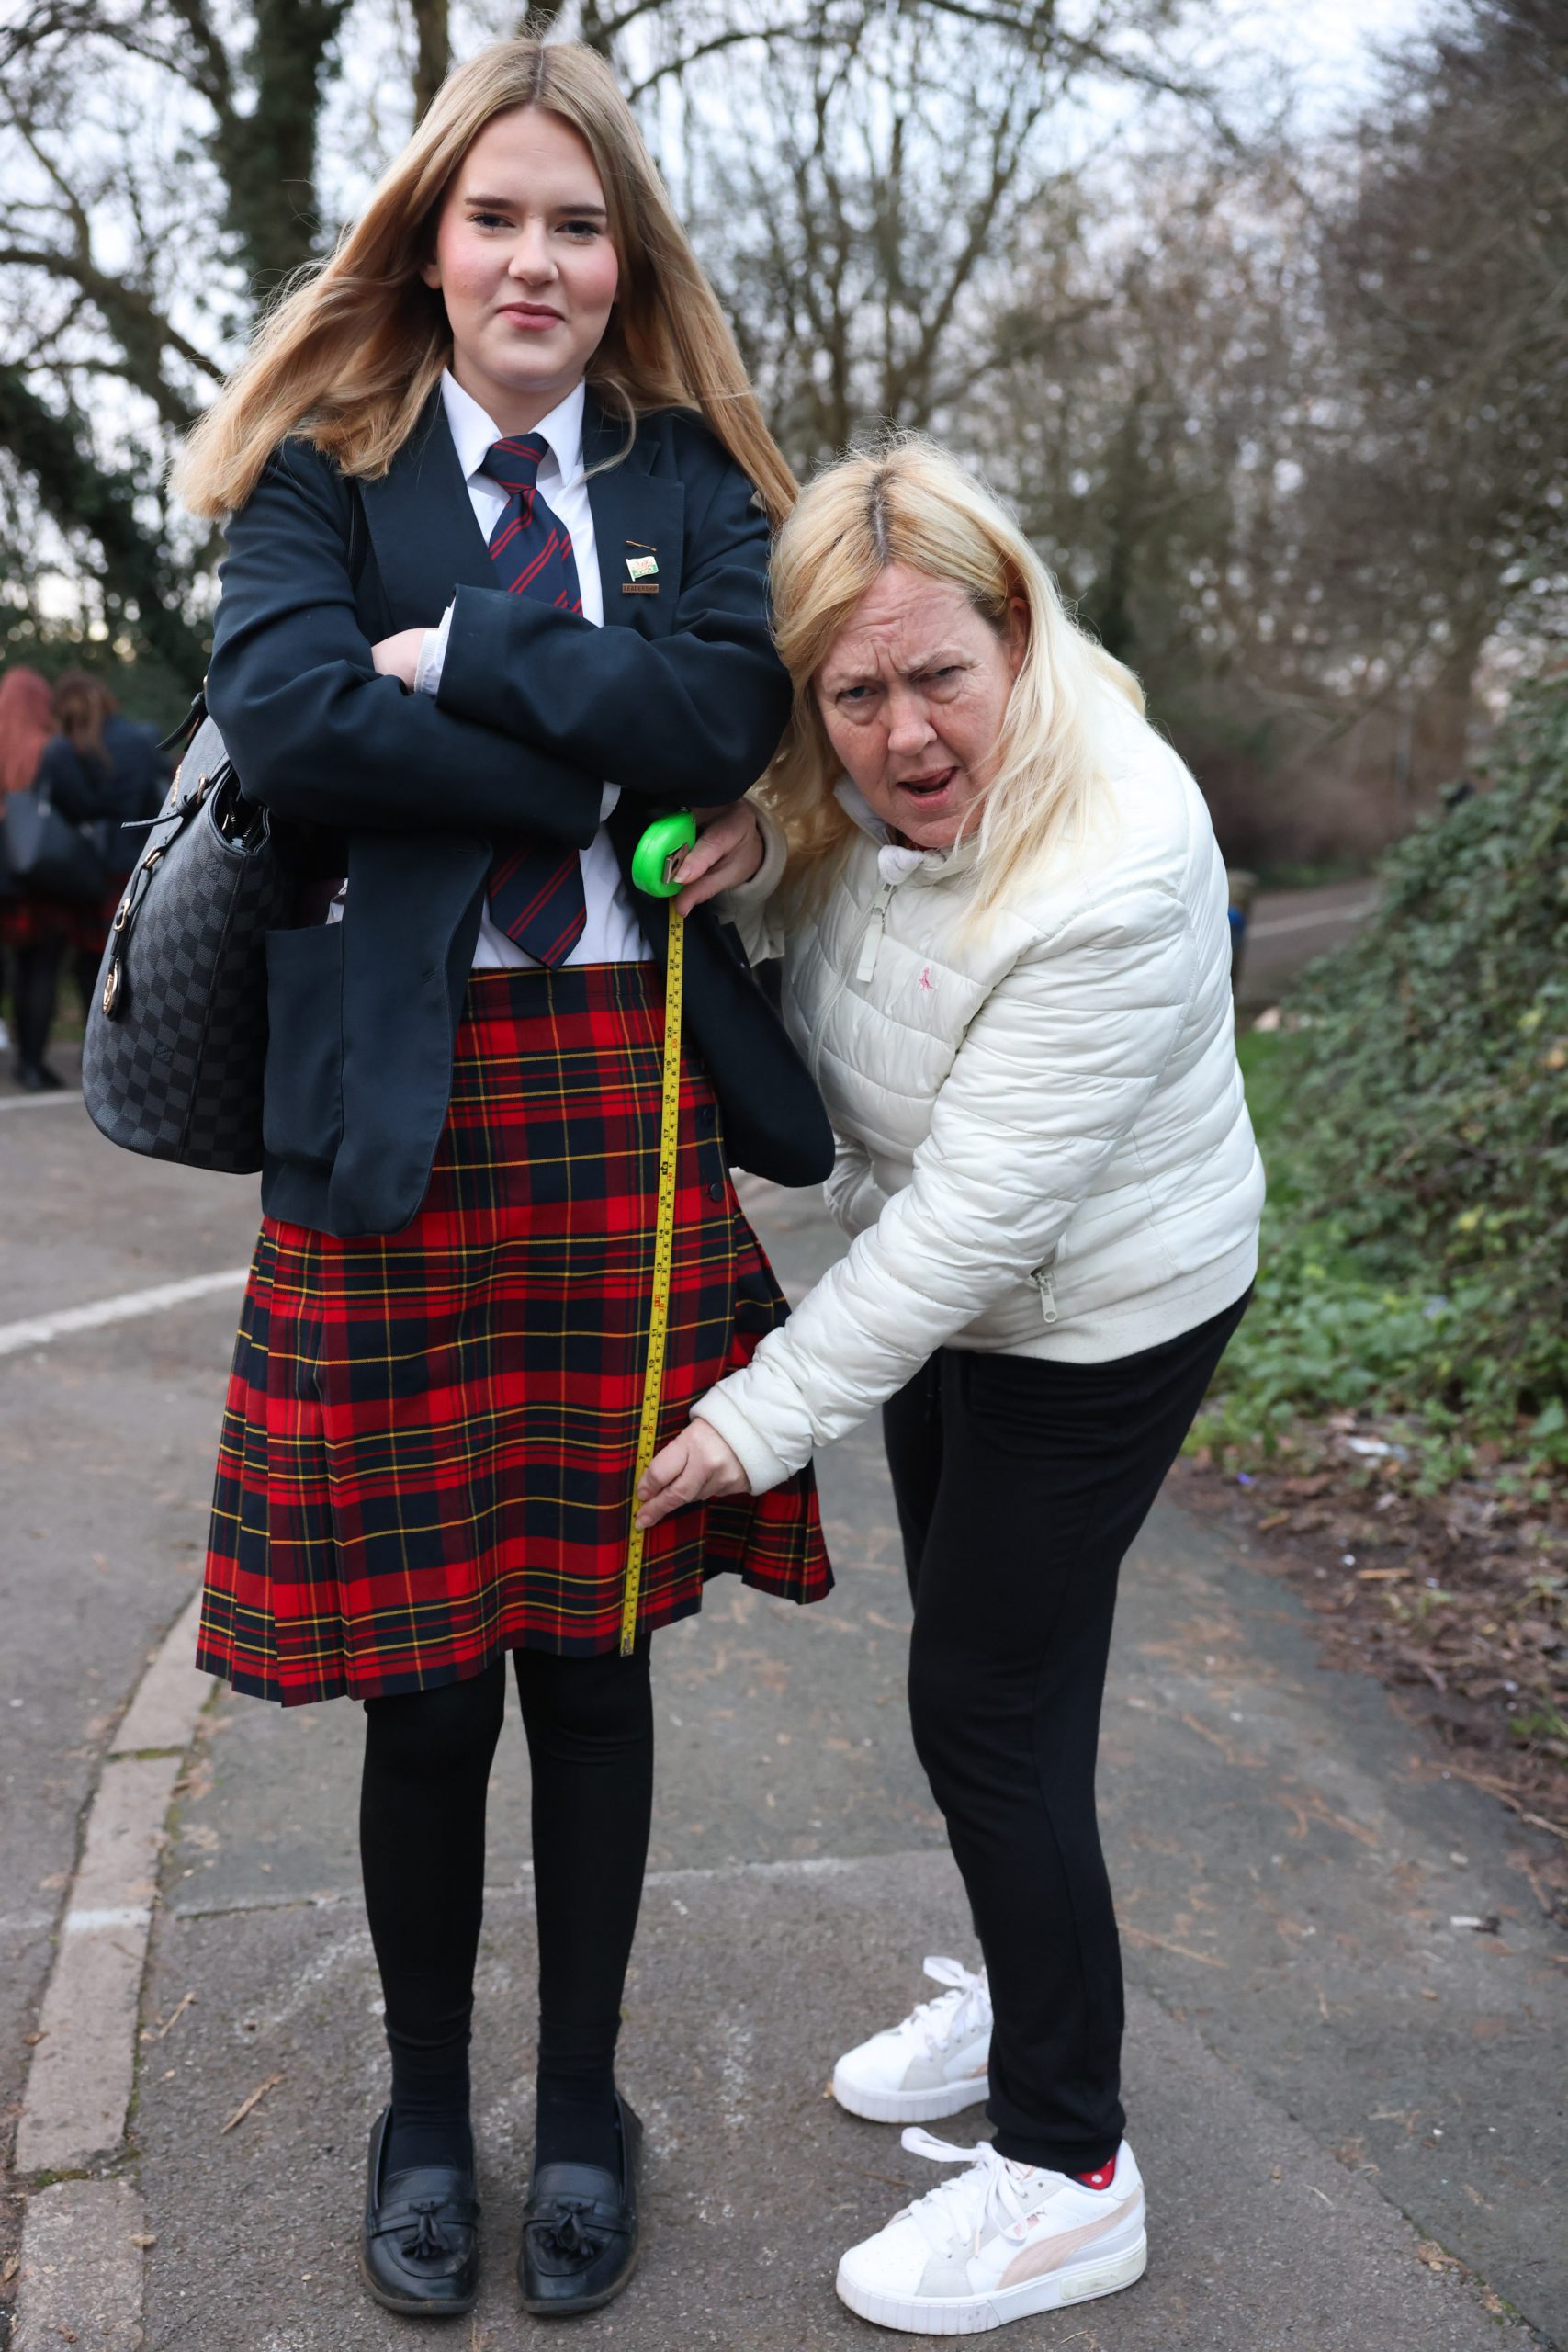 Mum furious as school ‘boots girls out of class’ over ‘discriminatory’ uniform policy